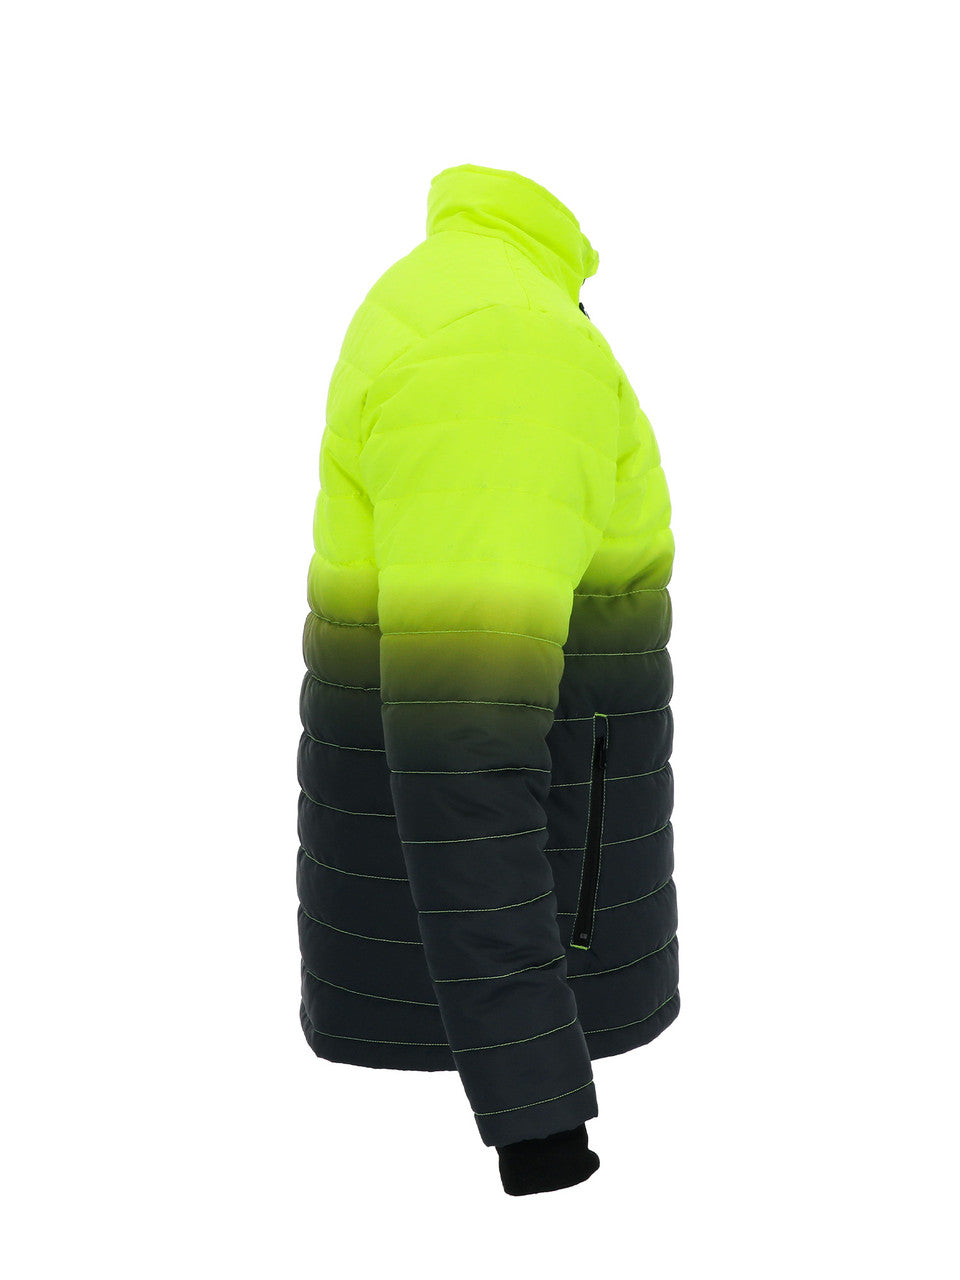 Refrigiwear Enhanced Visibility Quilted Jacket